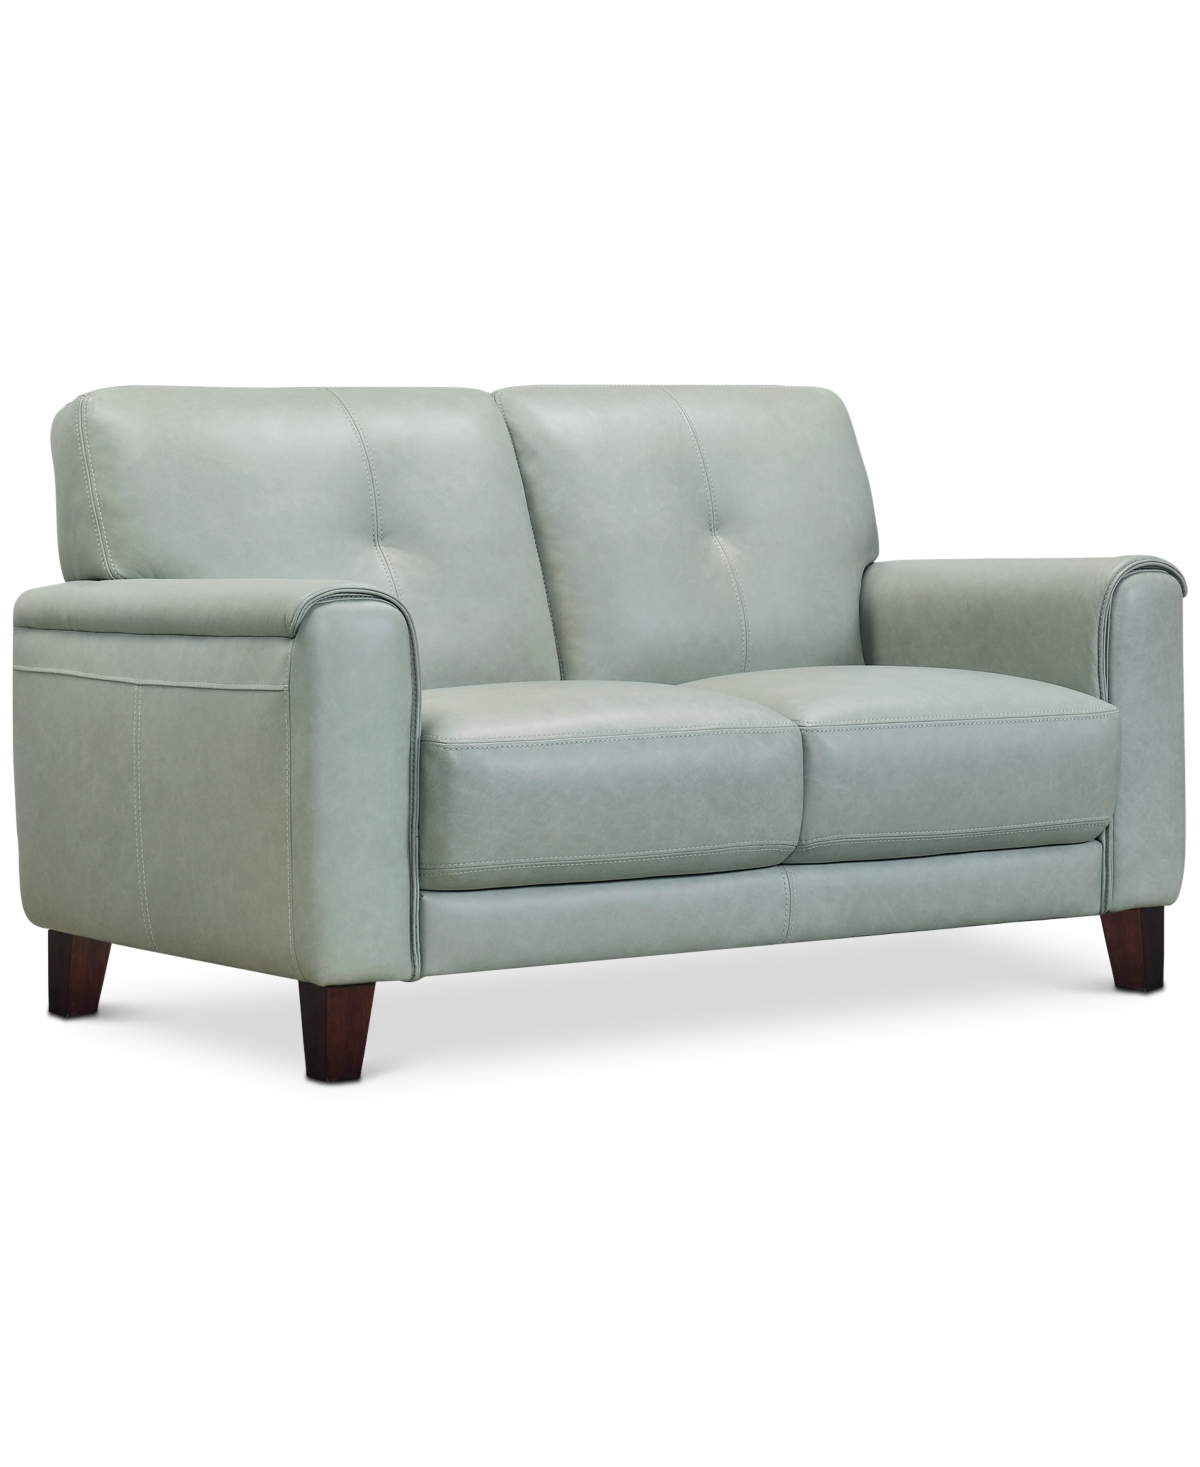 Furniture Ashlinn 61" Tufted Pastel Leather Loveseat, Created For Macy's In Mint Green